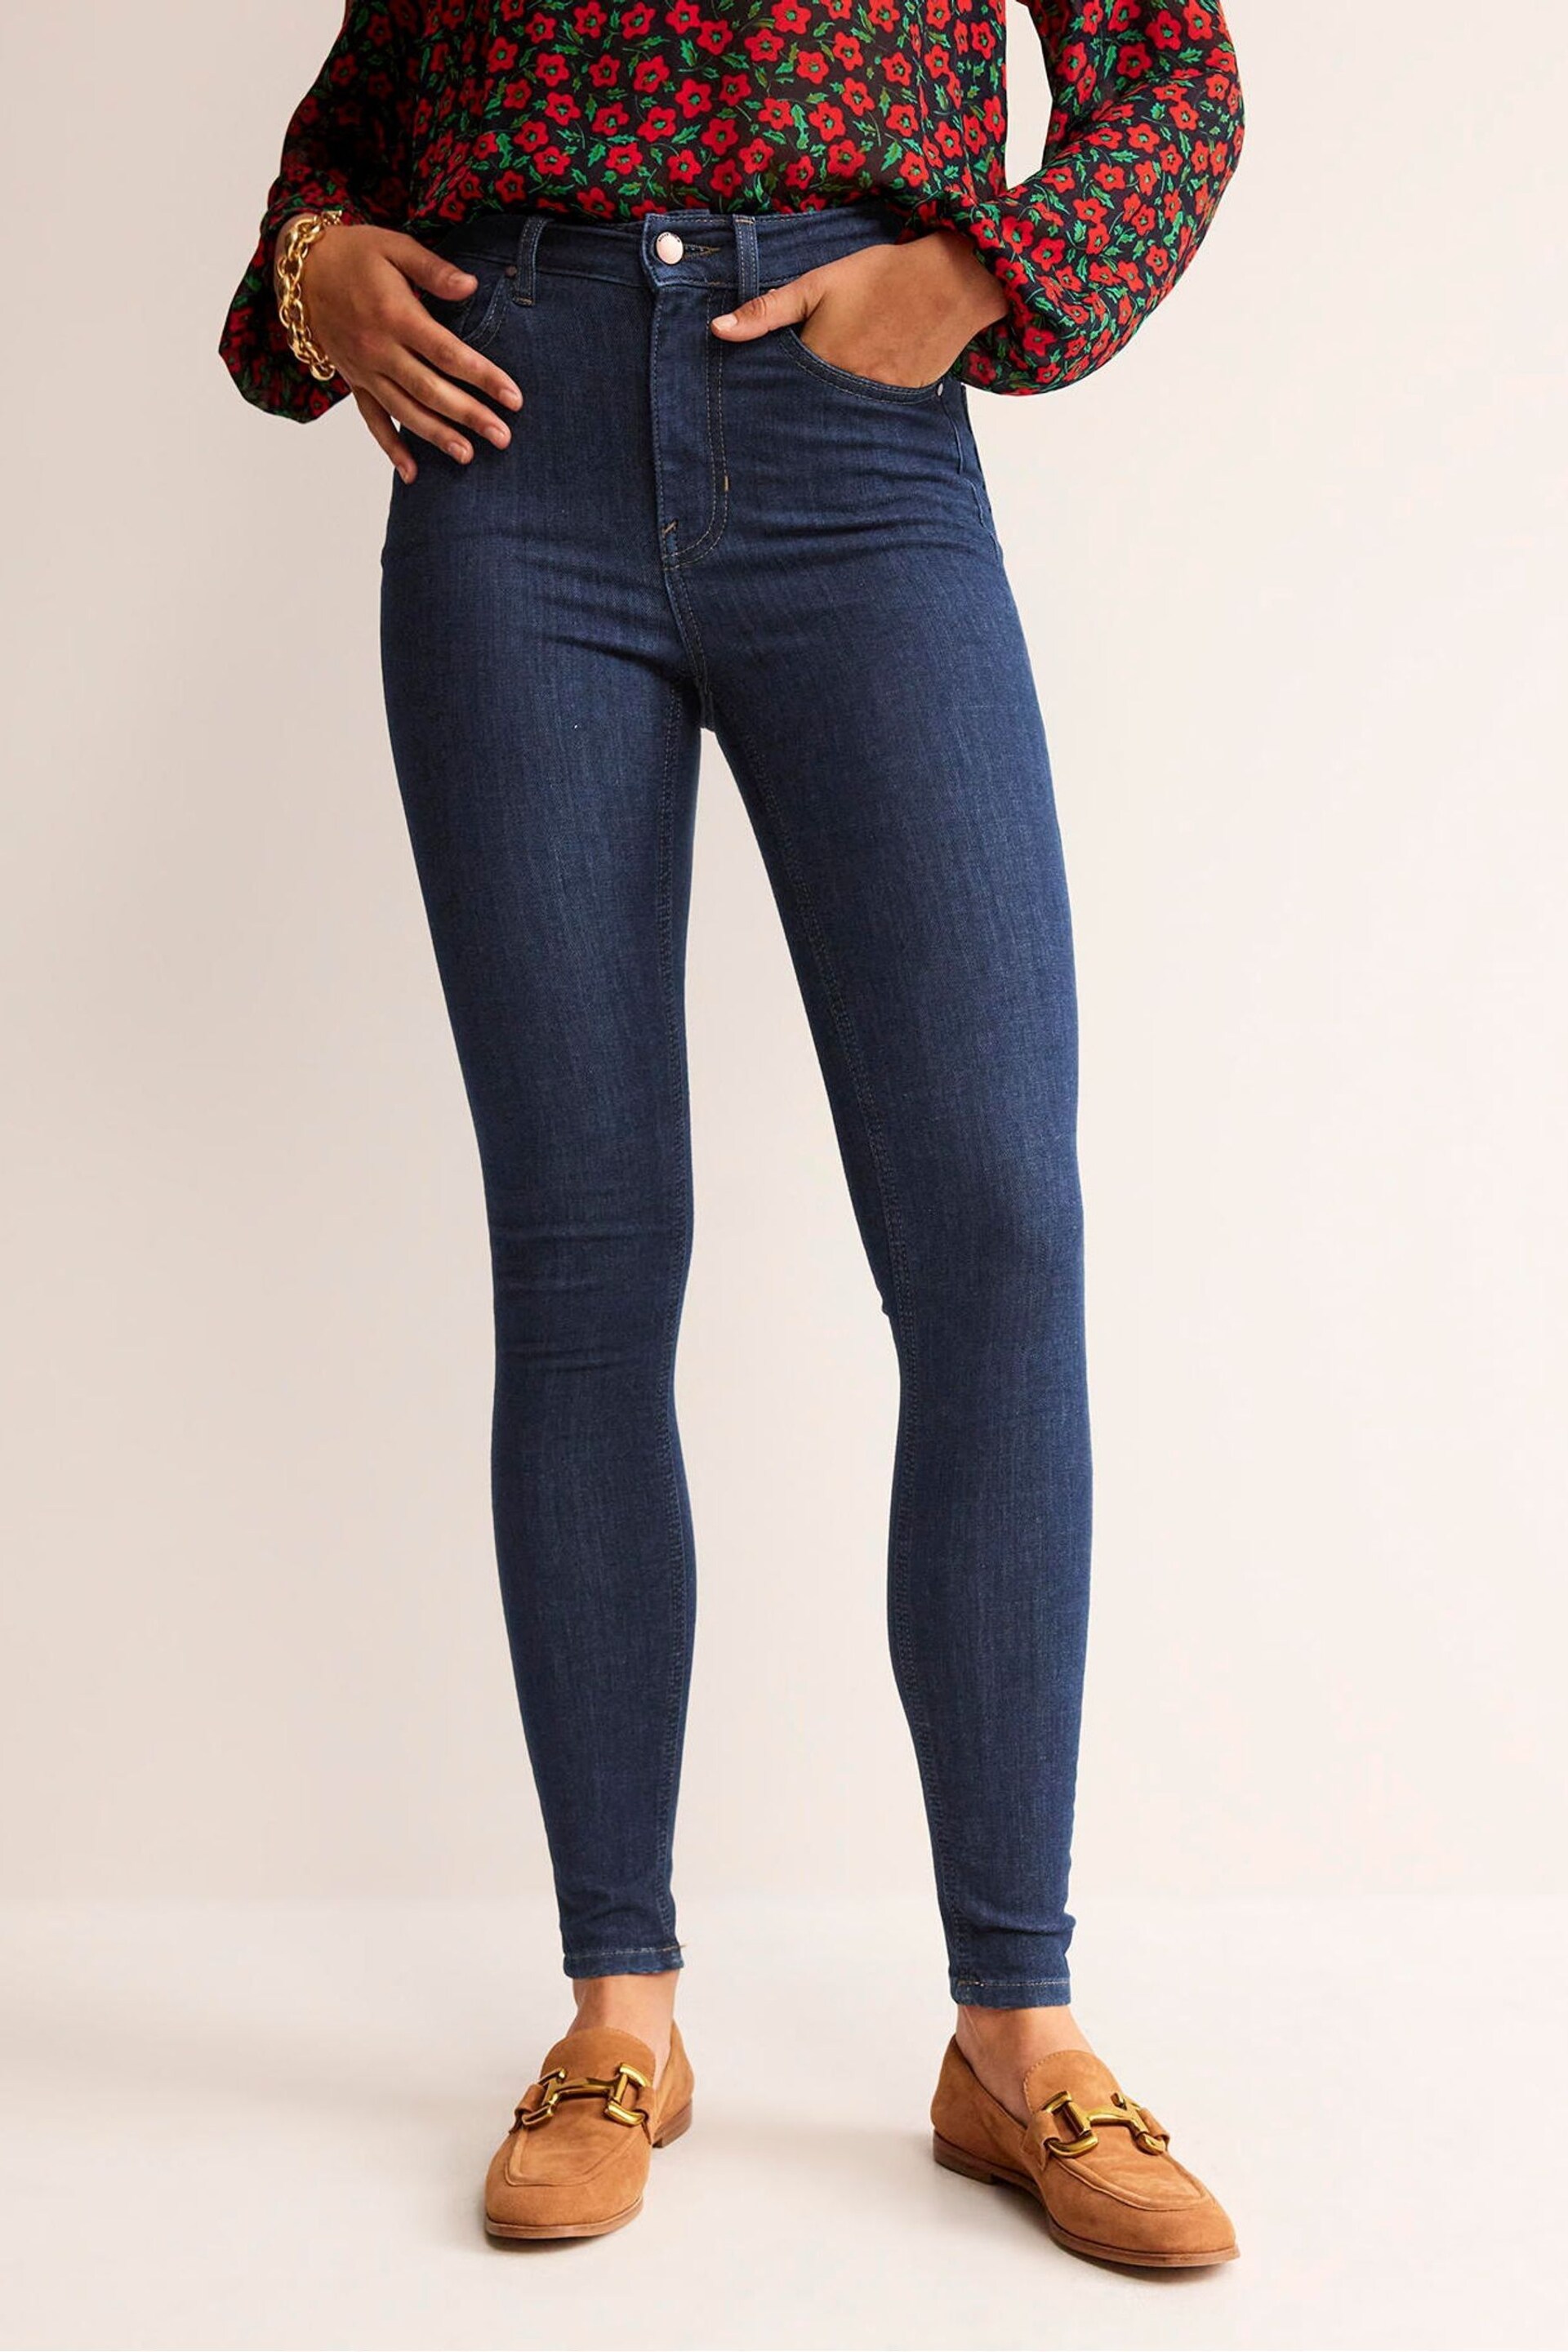 Boden Blue Comfort Stretch Jeans - Image 1 of 1